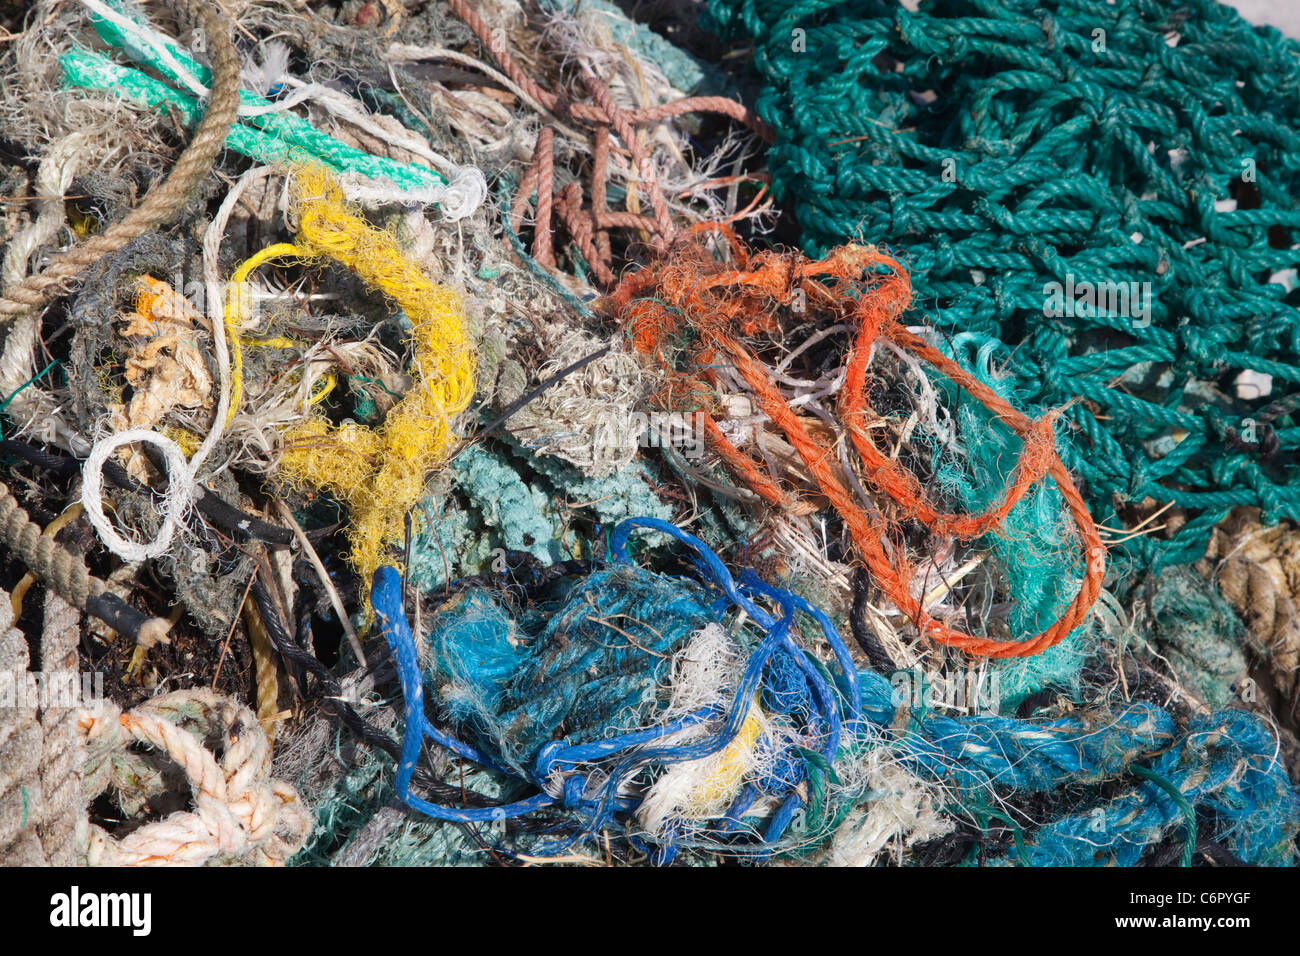 Plastic nets and ropes collected on a North Pacific island by tourists to prevent harm to seabirds or other wildlife Stock Photo